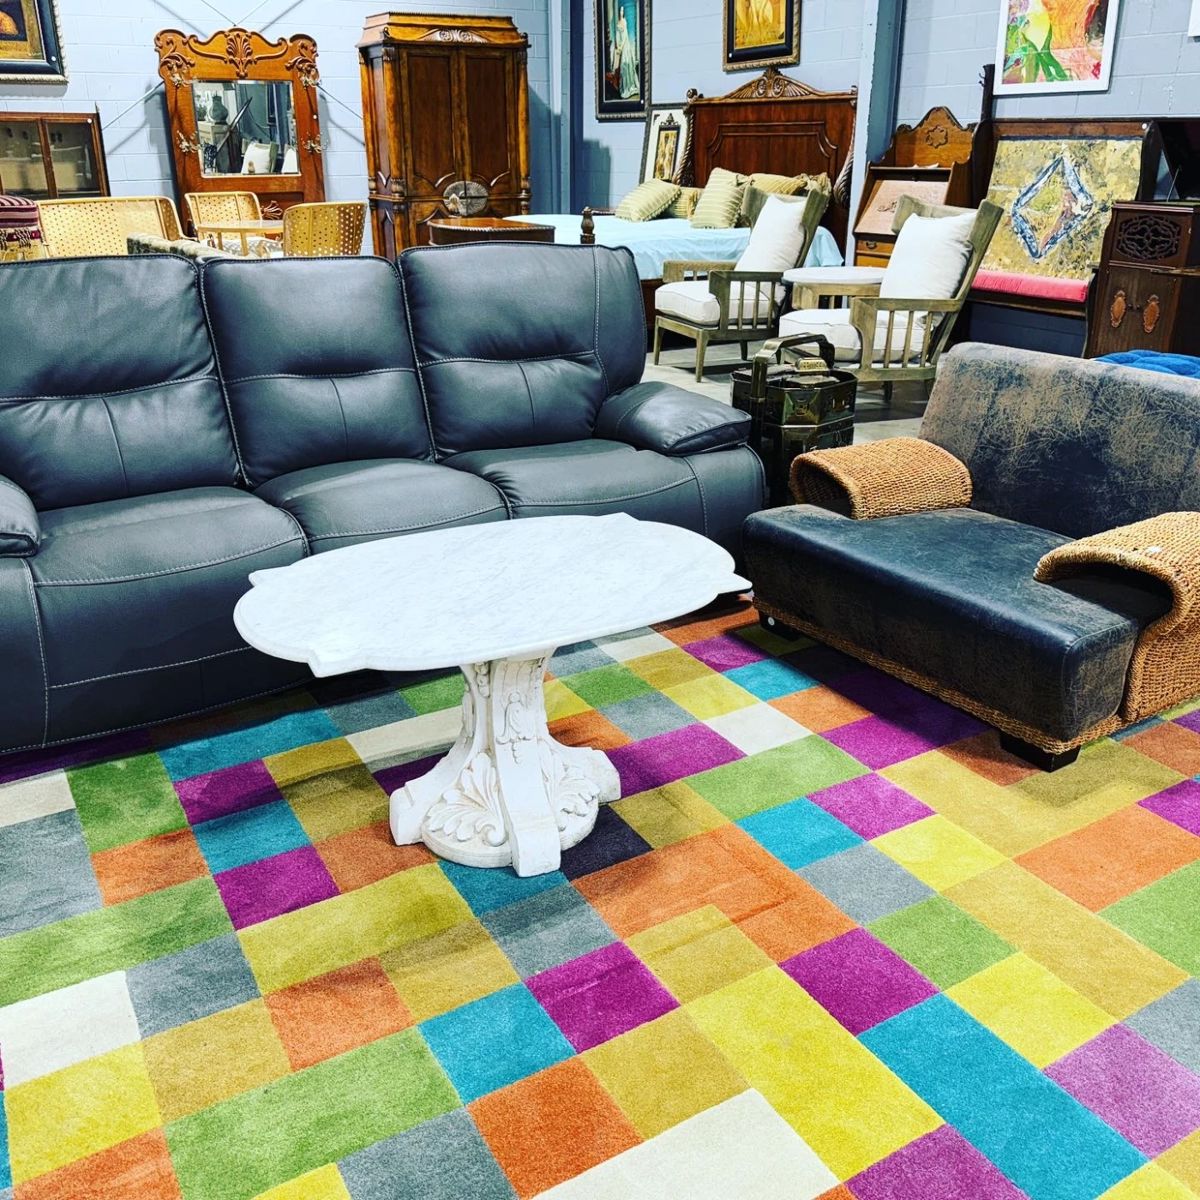 Abstract Rug, Leather Reclining Sofa and Oversized Chair Orlando Estate Auction